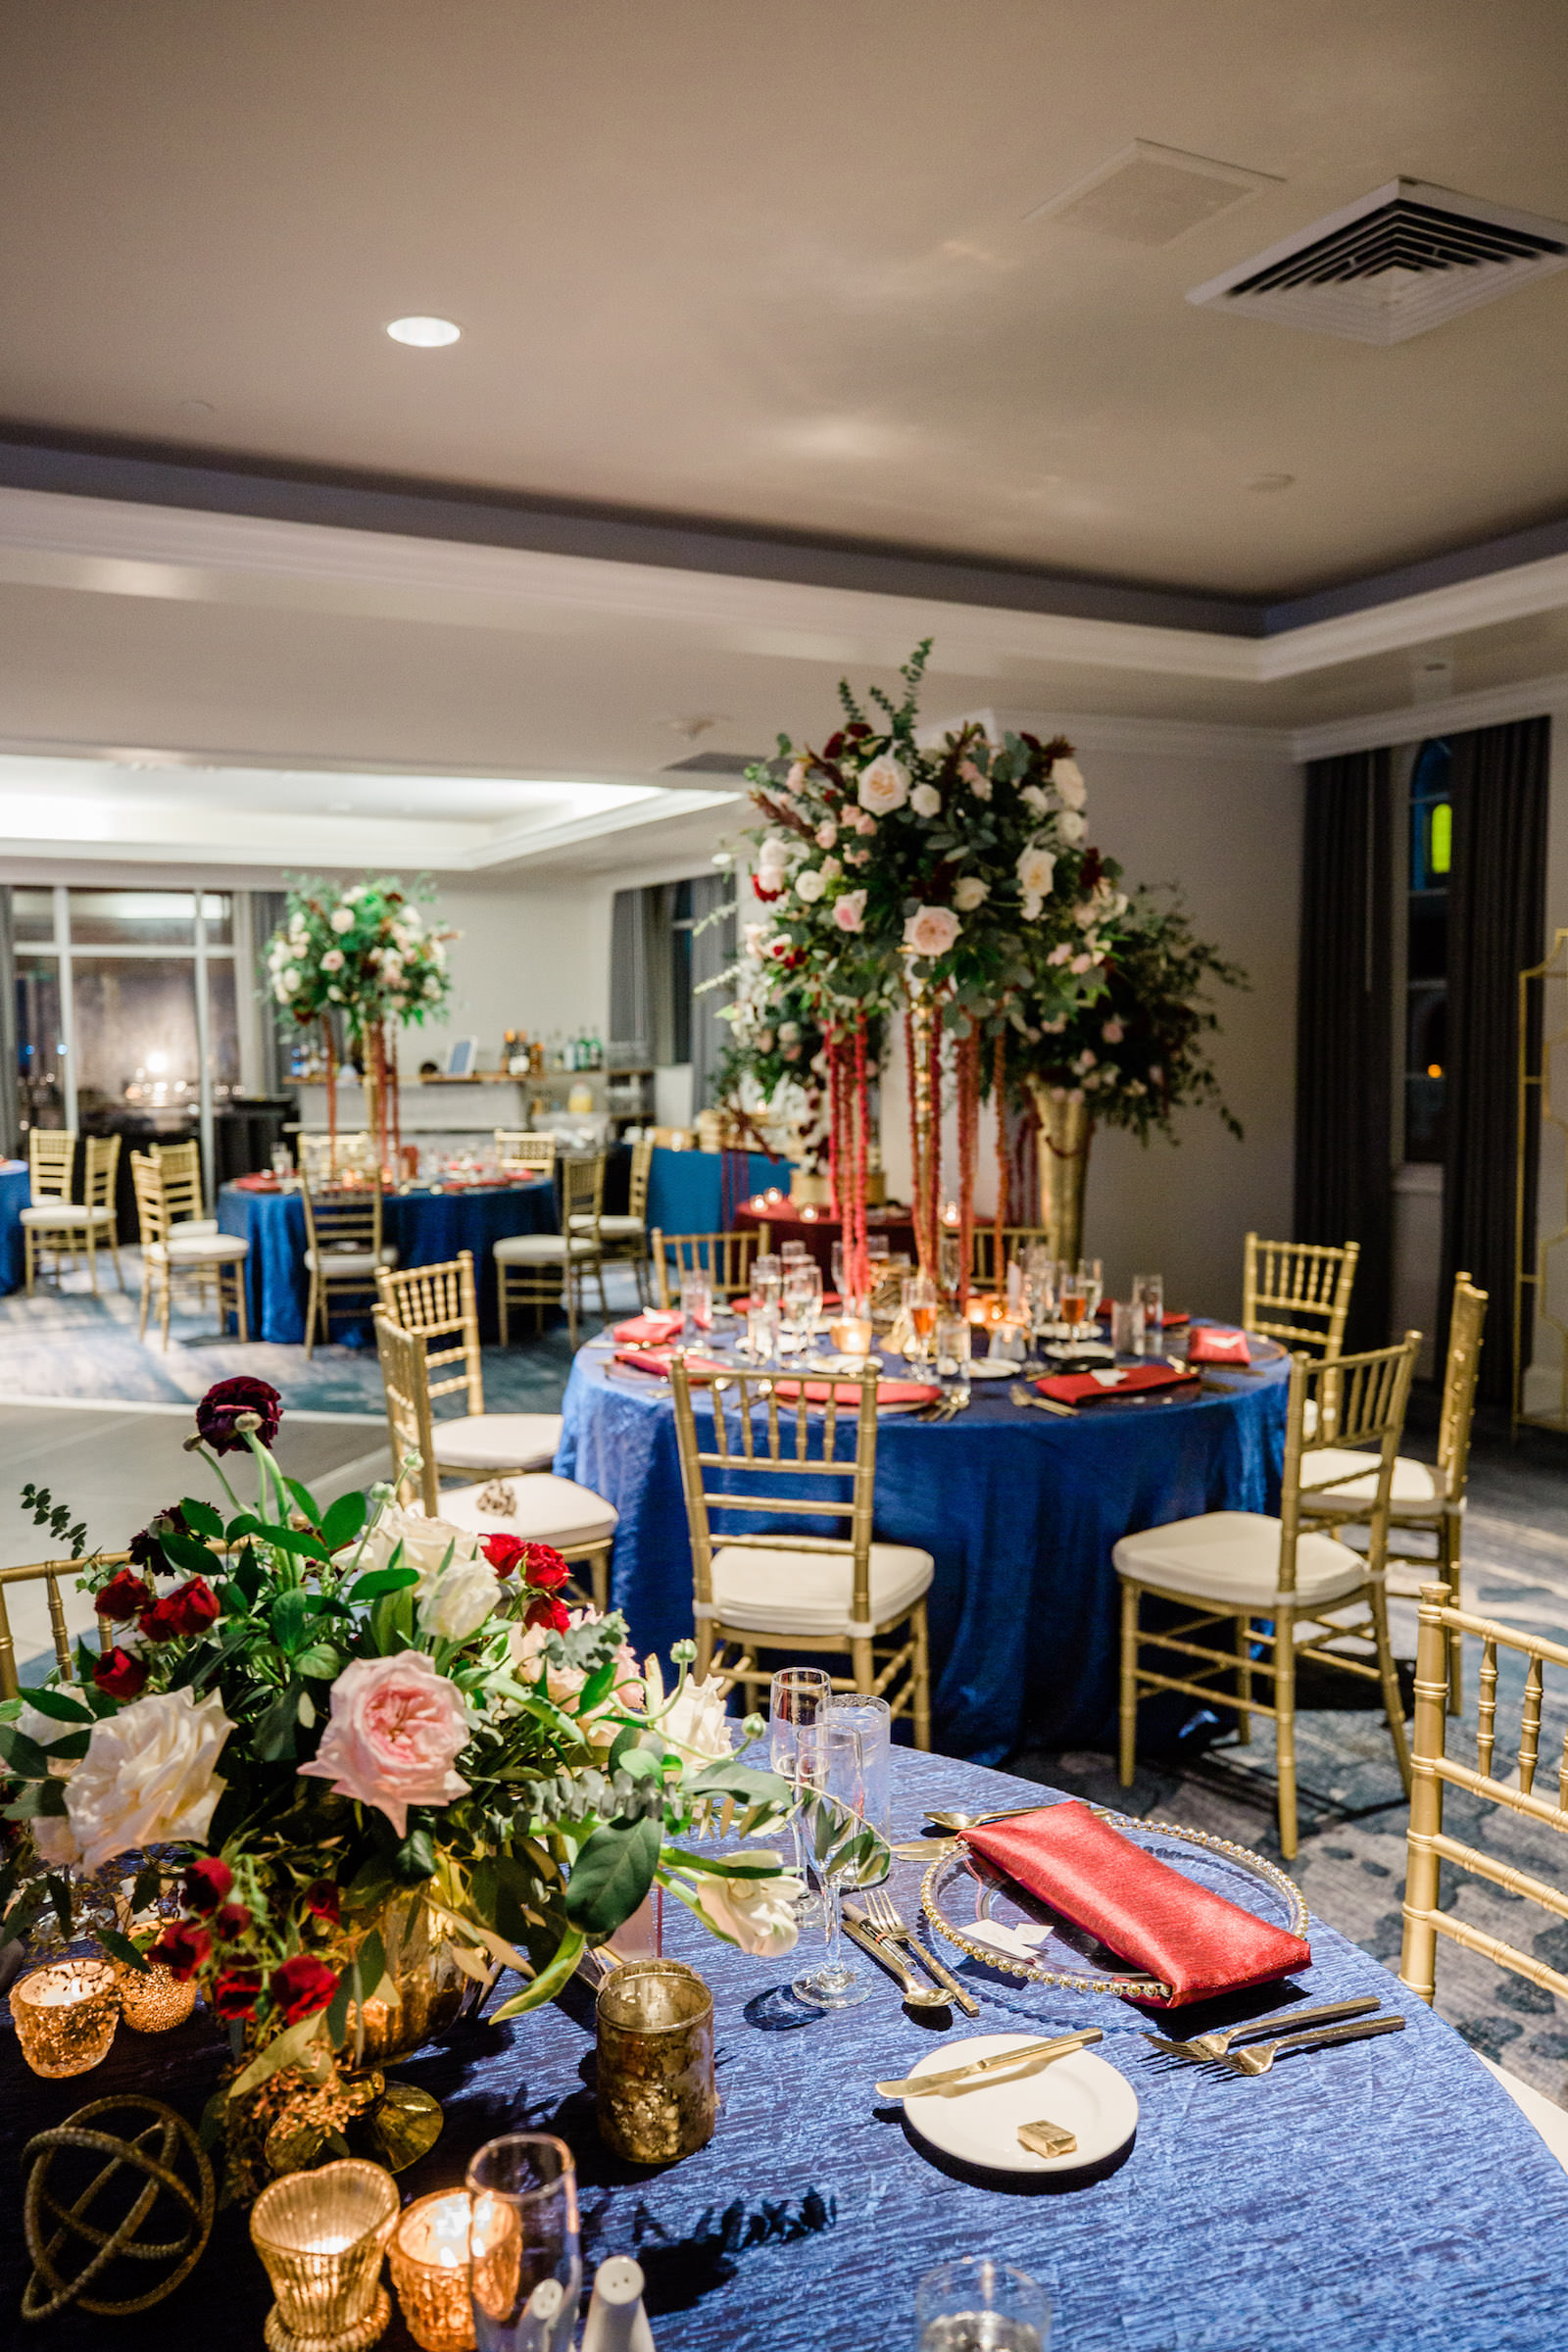 Elegant Navy Wedding Reception Decor, Tall Gold Vase with Greenery, Blush Pink and White Roses, Dark Purple and Red Flowers with Hanging Amaranthus Flower Centerpiece, Navy Blue Table Linen, Gold Chiavari Chairs | Tampa Bay Wedding Florist Botanica | St. Petersburg Wedding Venue The Don Cesar